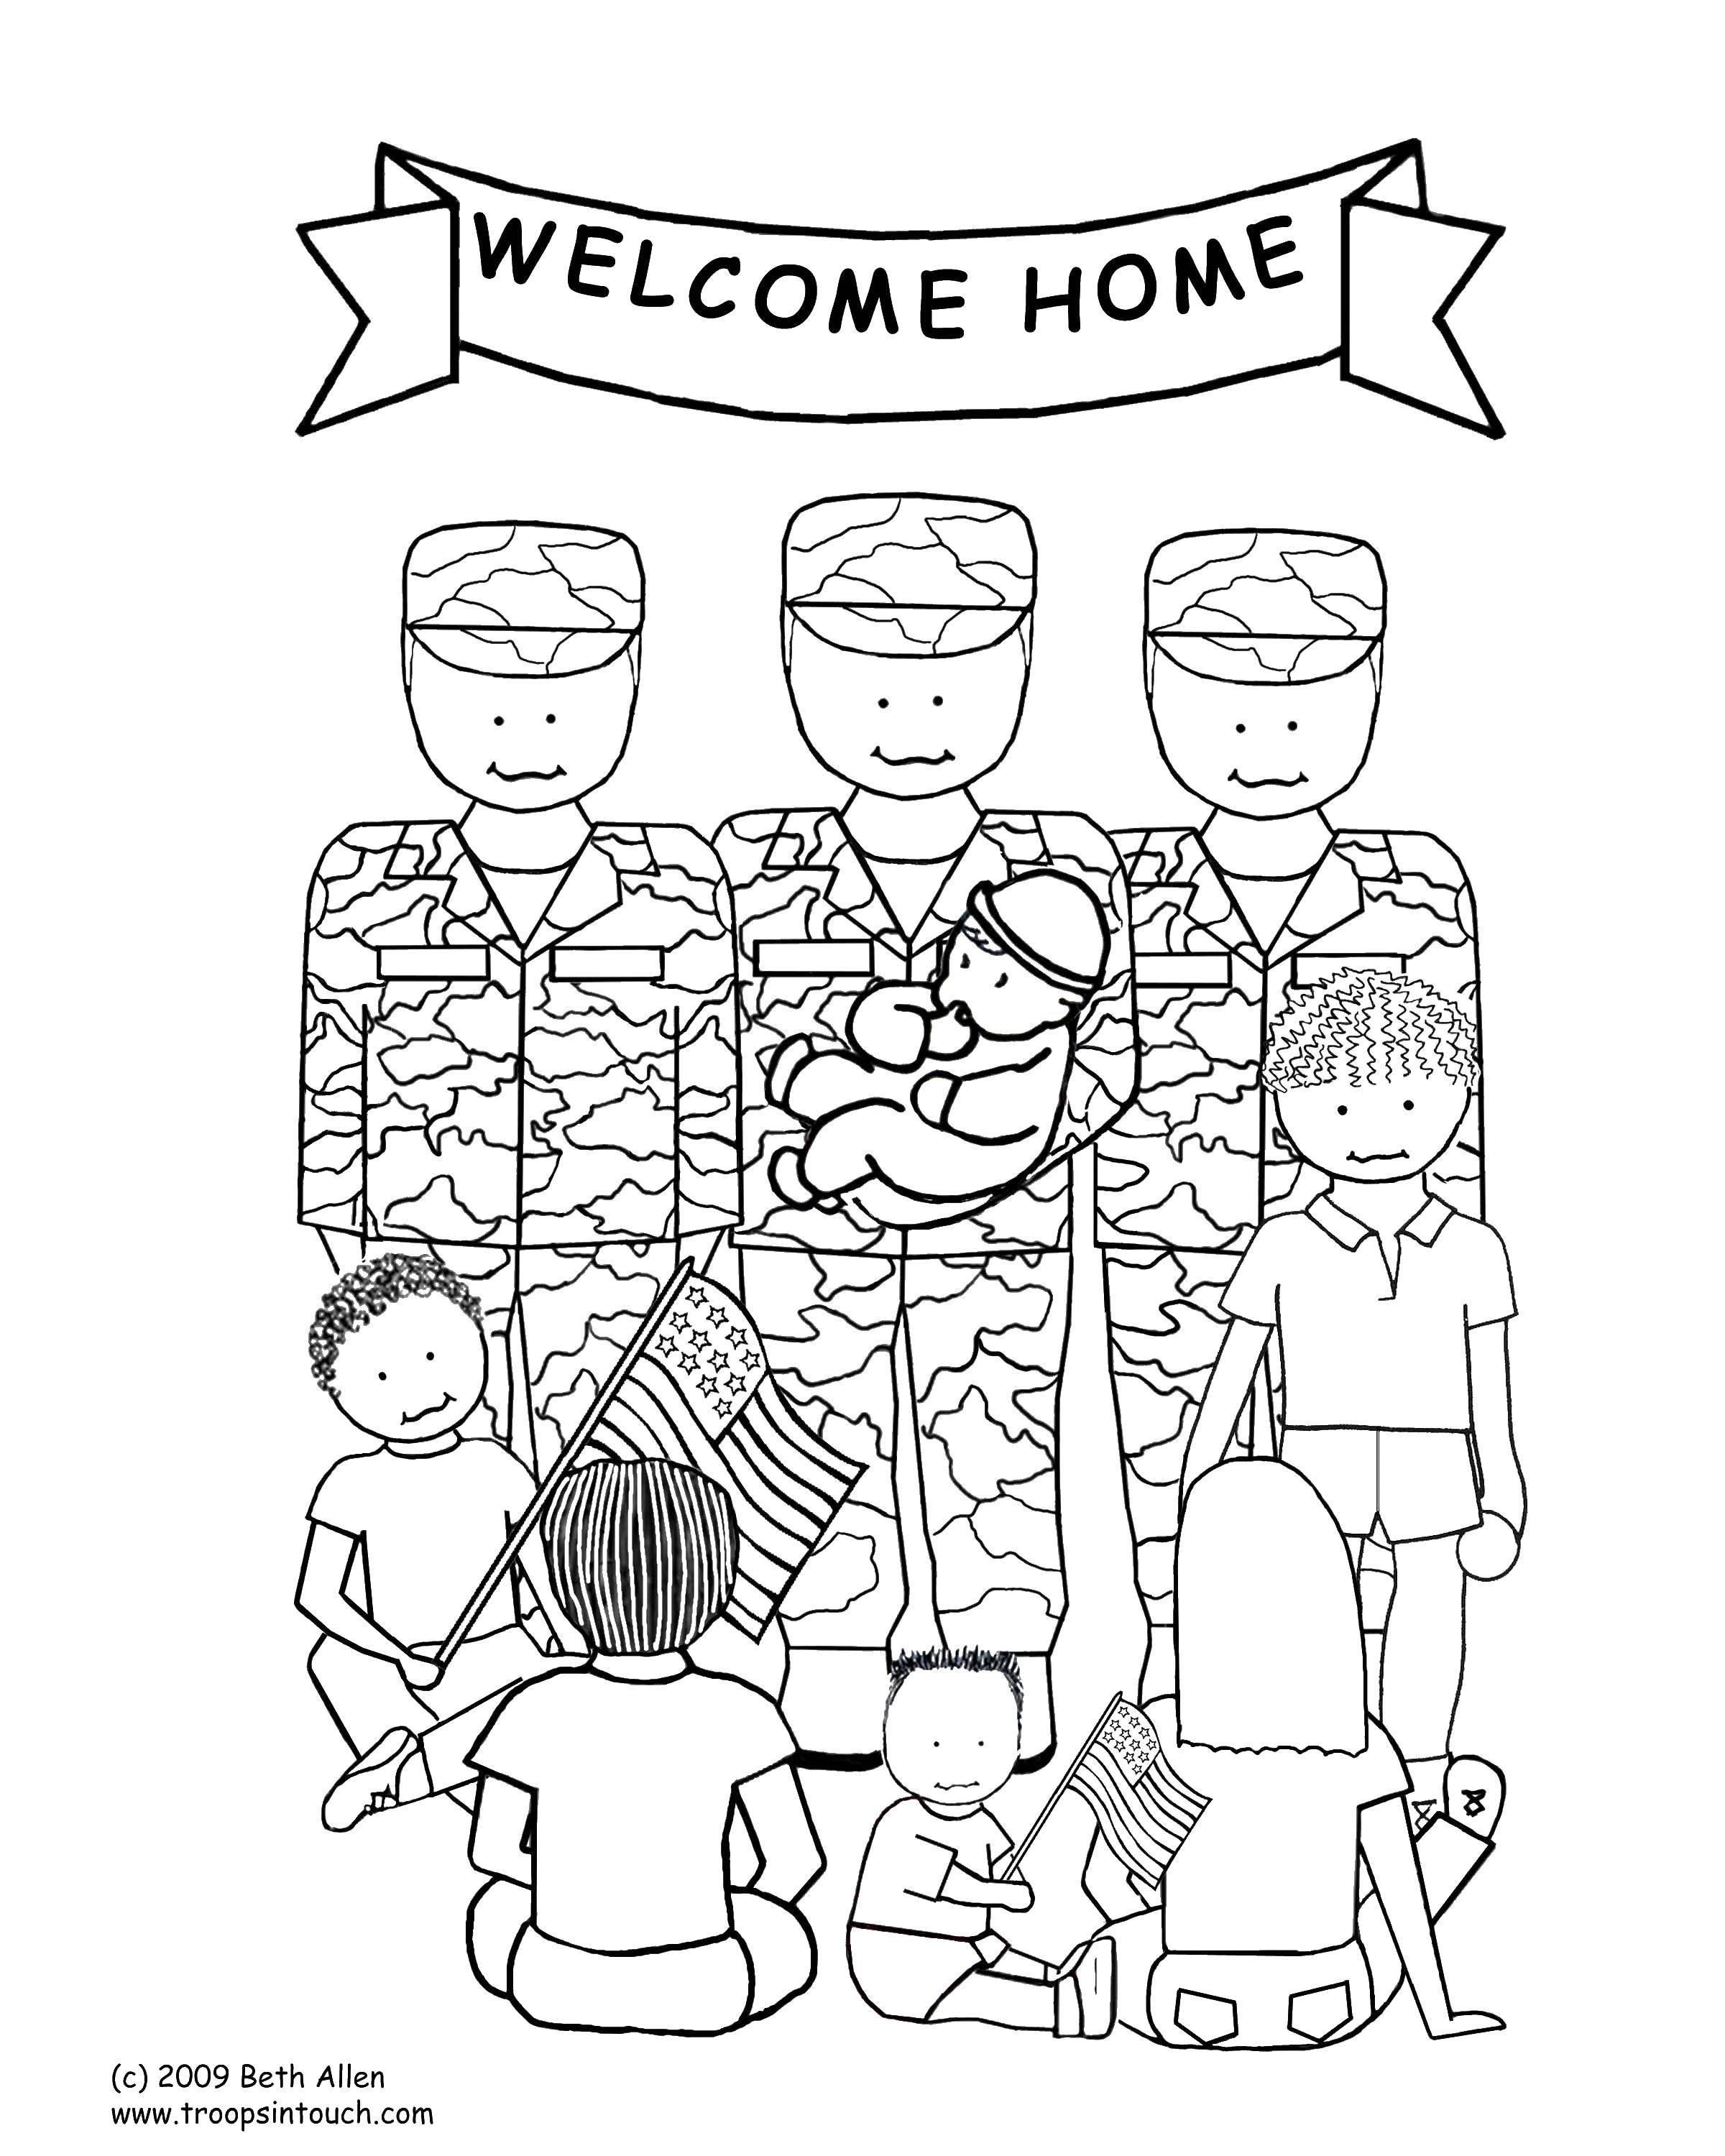 Coloring Soldiers and children. Category coloring. Tags:  soldiers, children, flags.